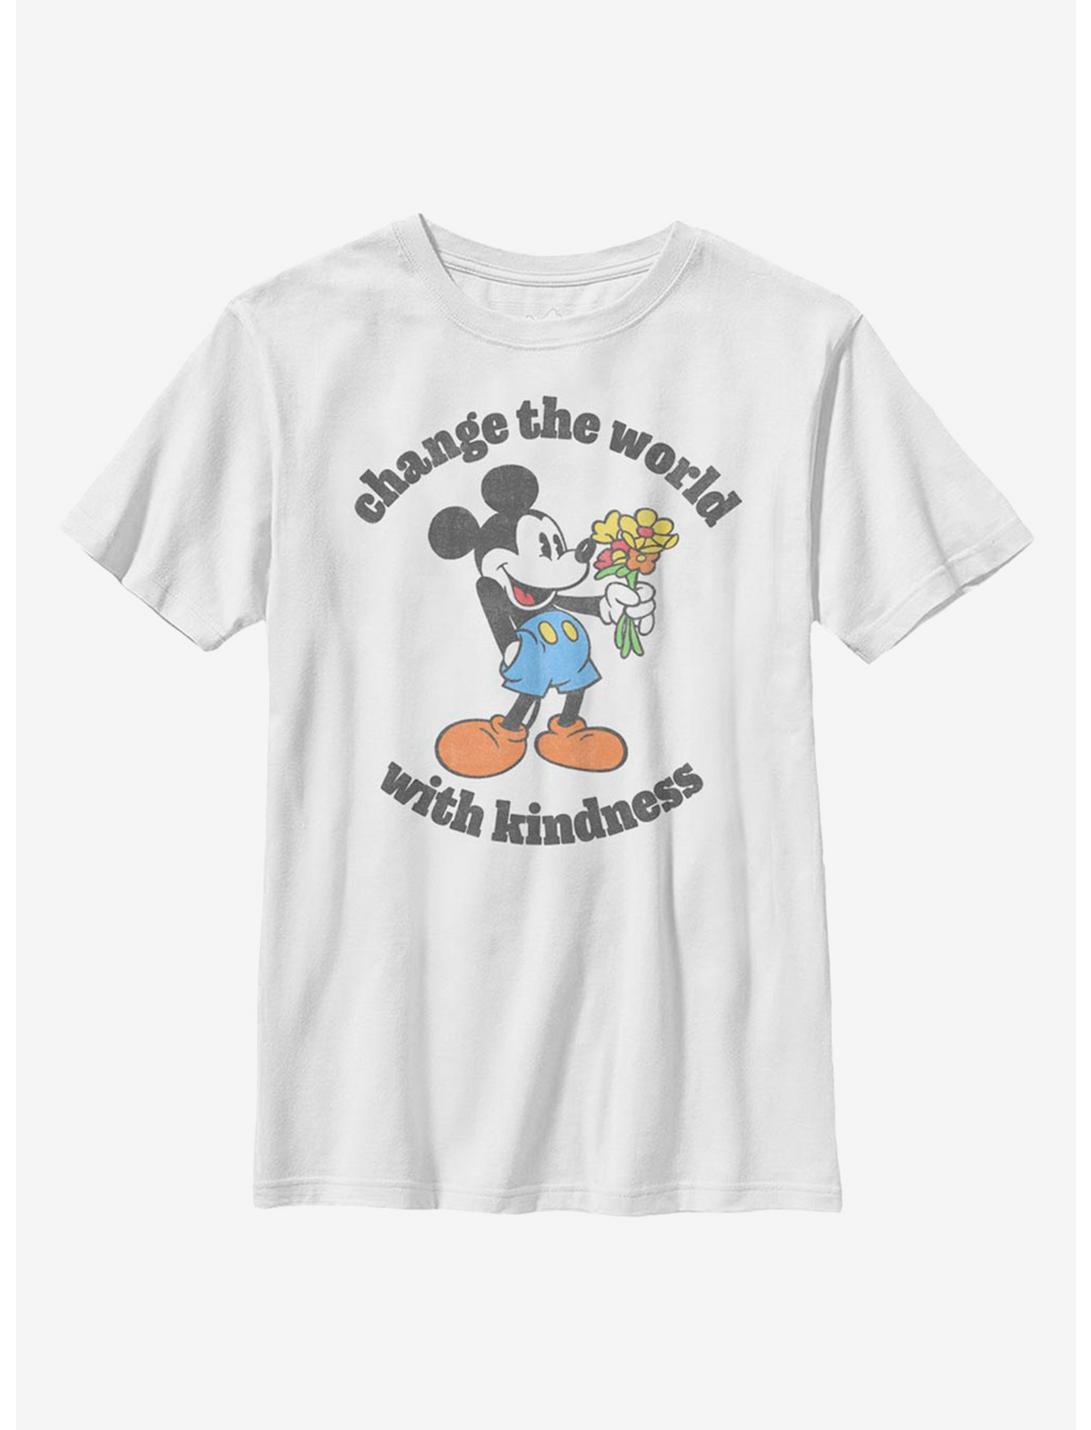 Disney Mickey Mouse Kindness Youth T-Shirt, WHITE, hi-res